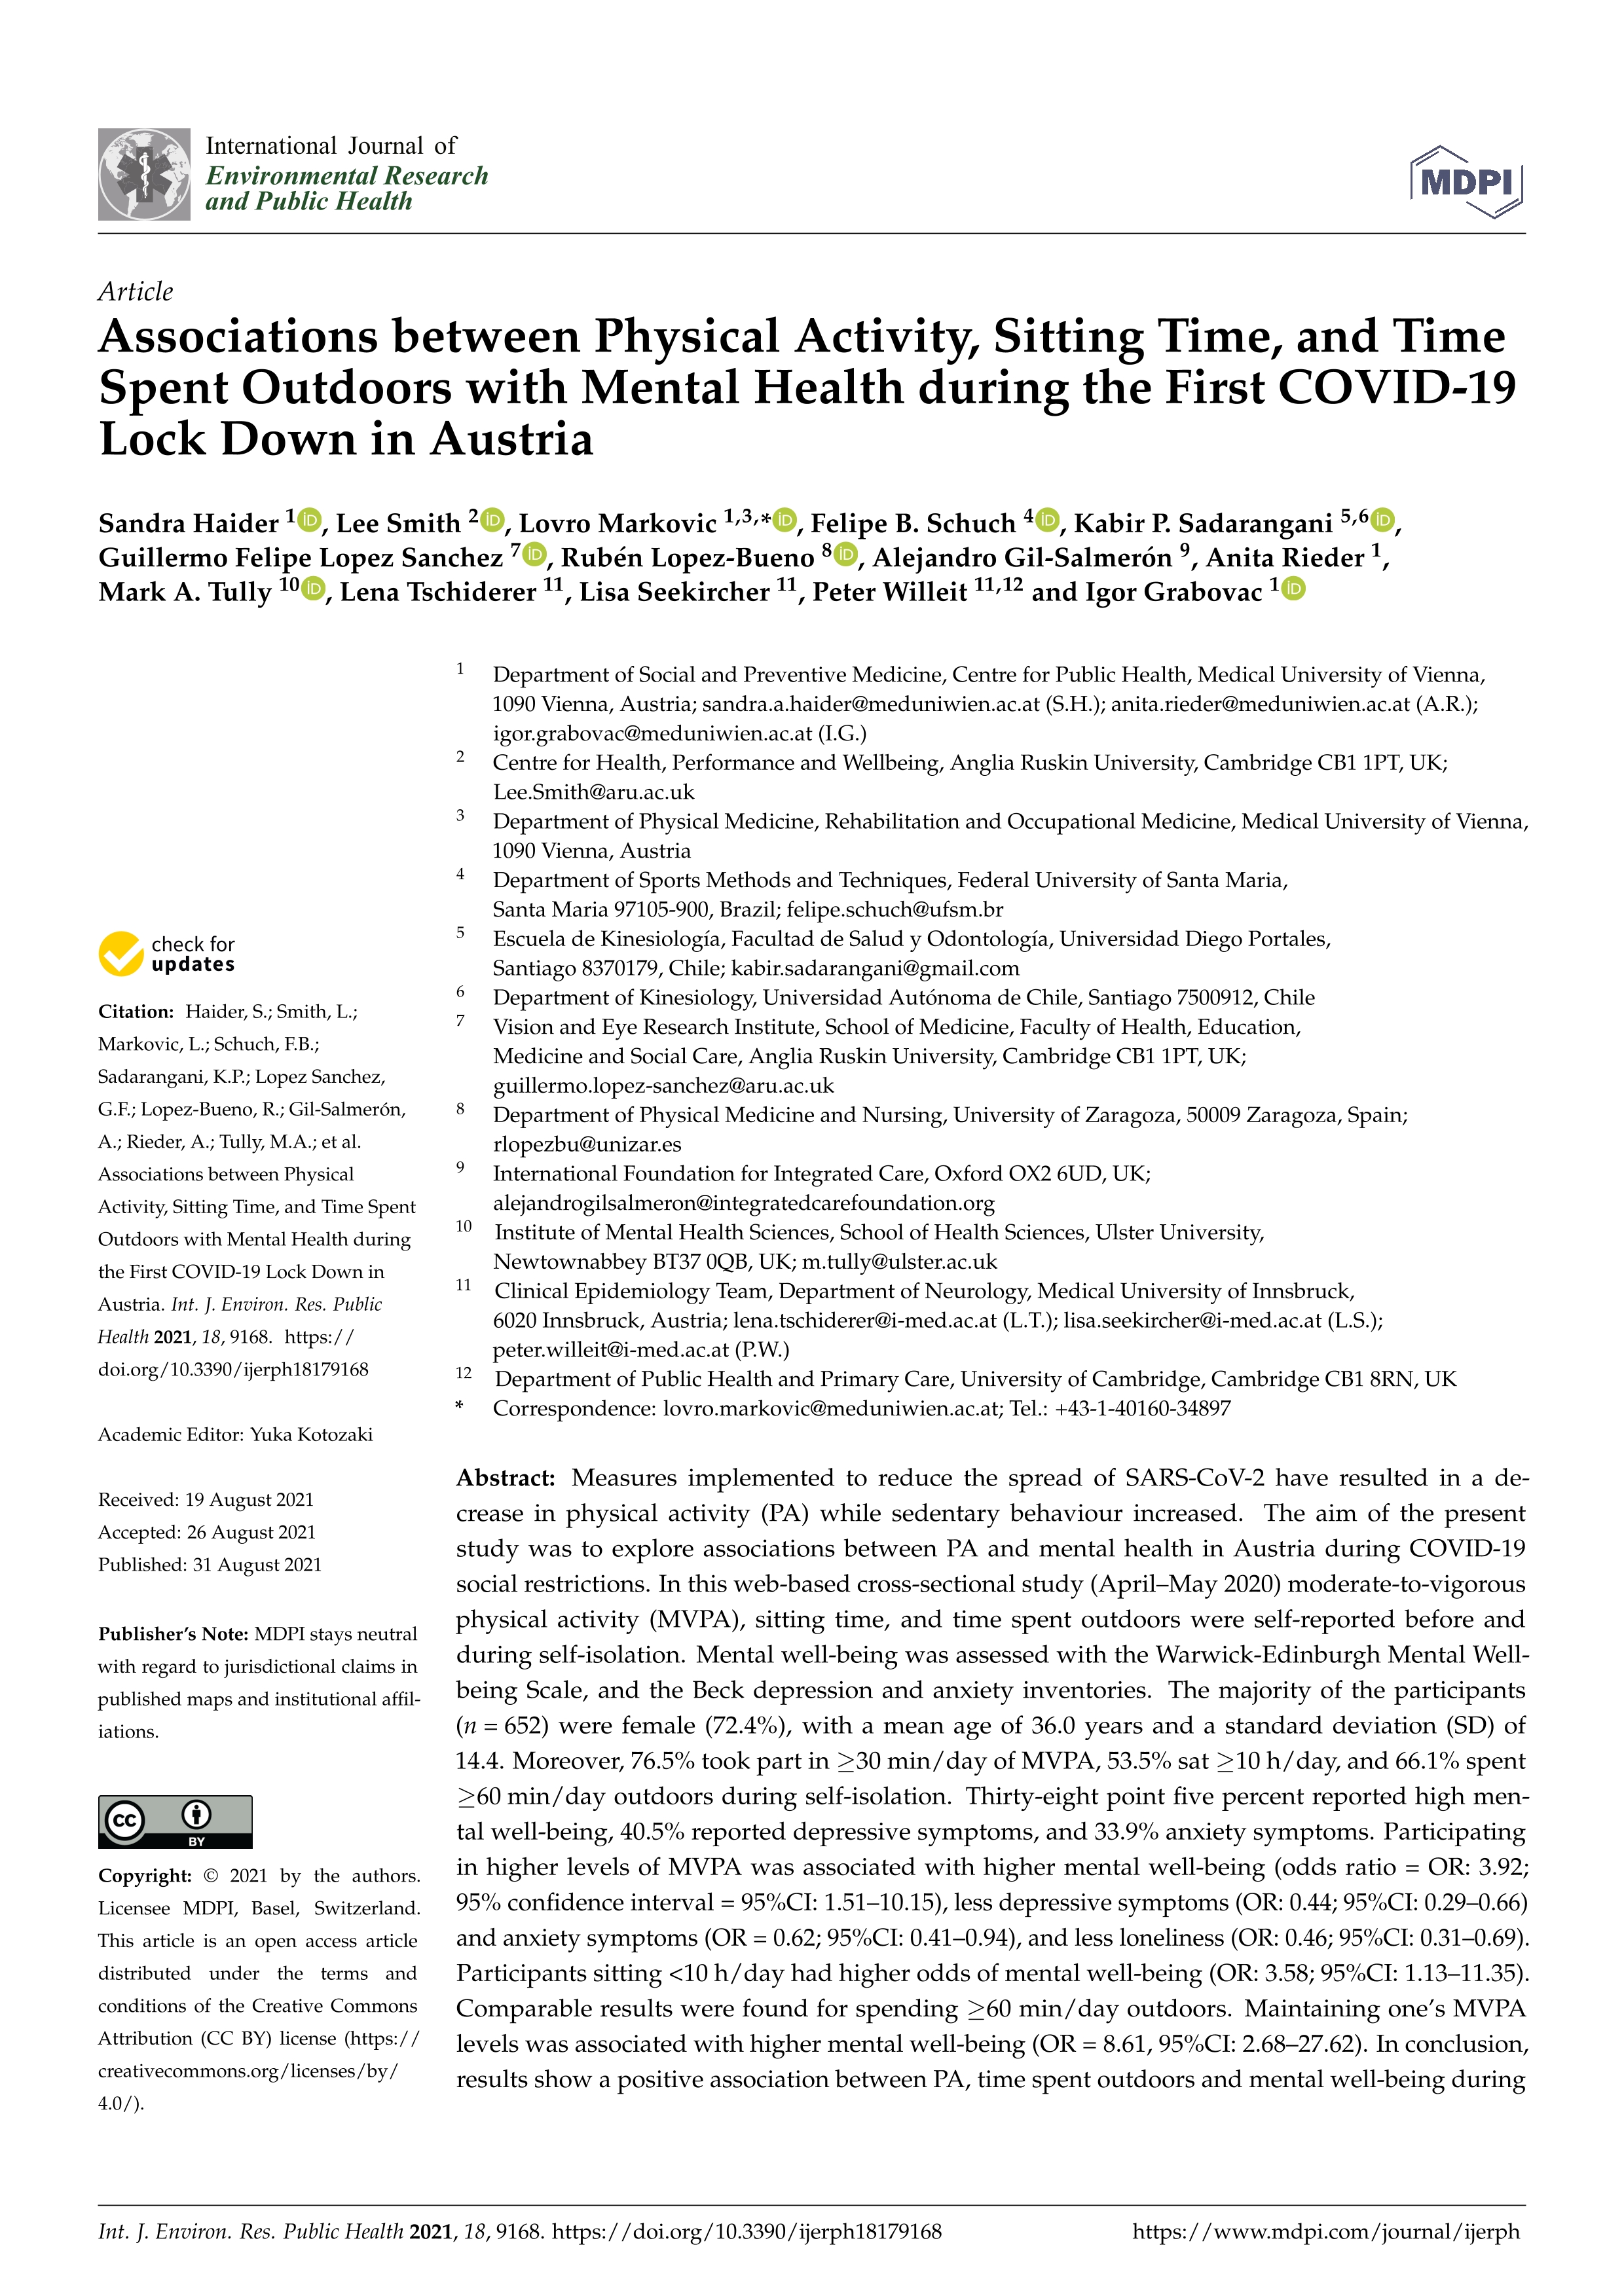 Associations between physical activity, sitting time, and time spent outdoors with mental health during the First COVID-19 lock down in Austria